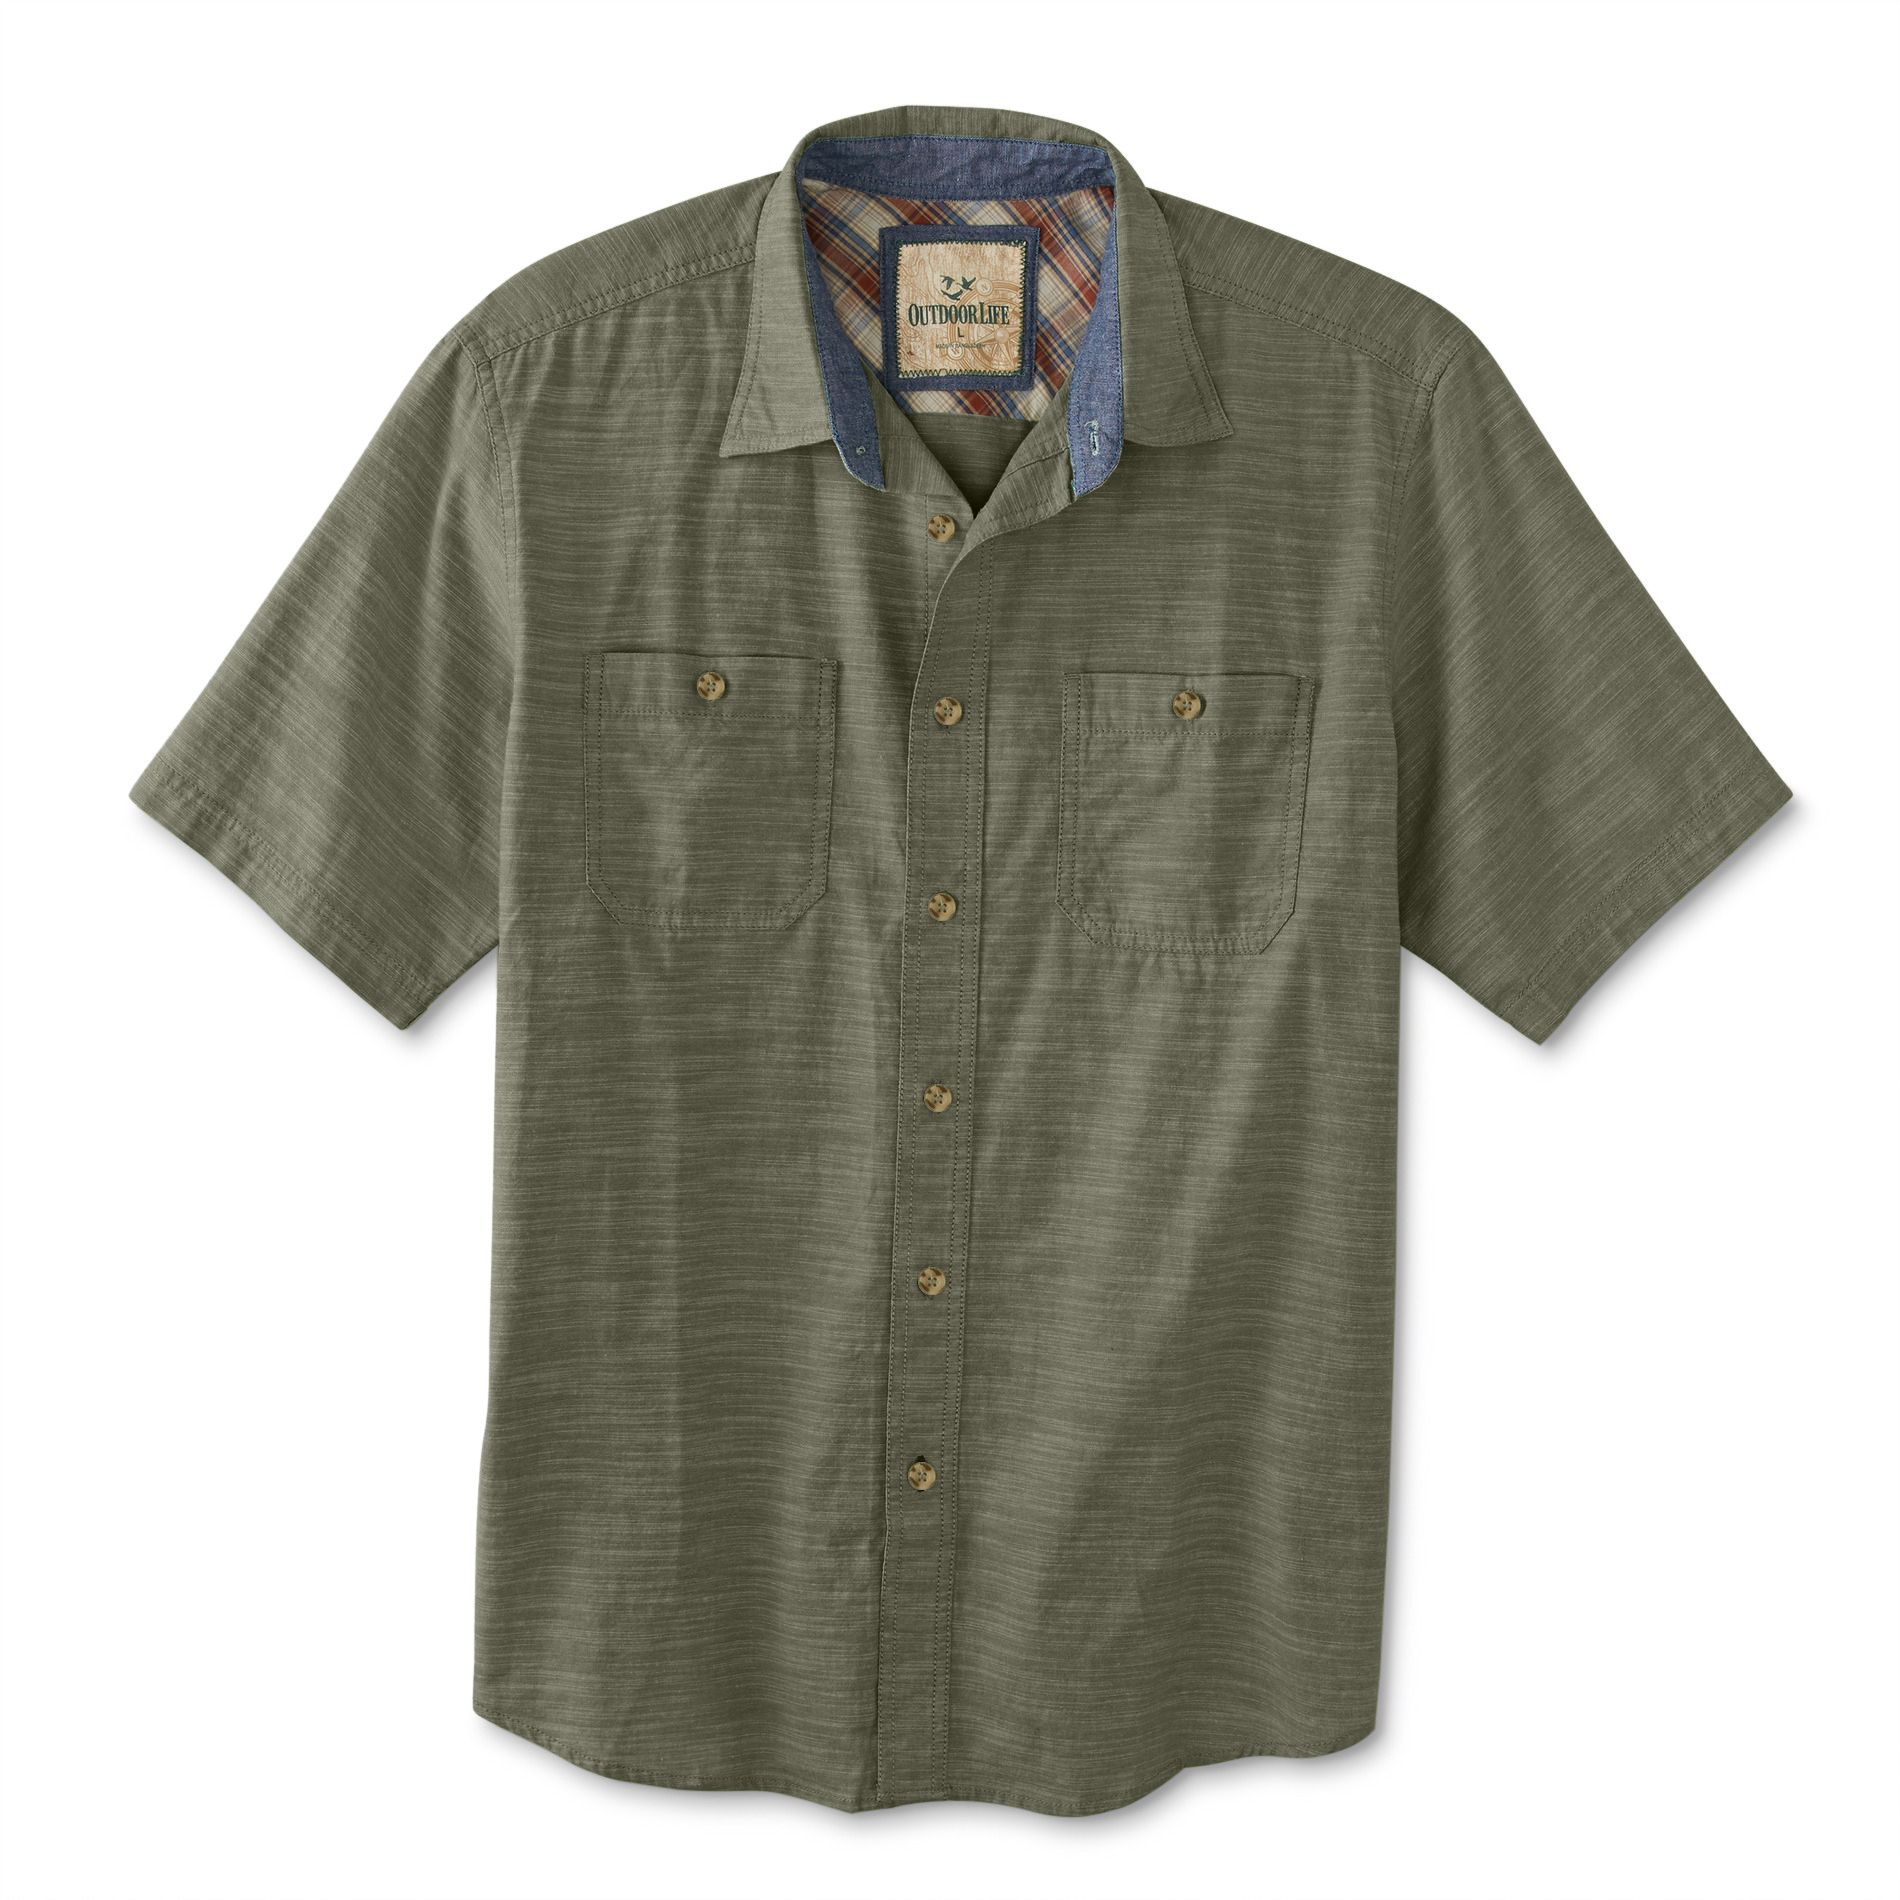 Outdoor Life Men's Big & Tall Button-Front Canvas Shirt - Space-Dyed